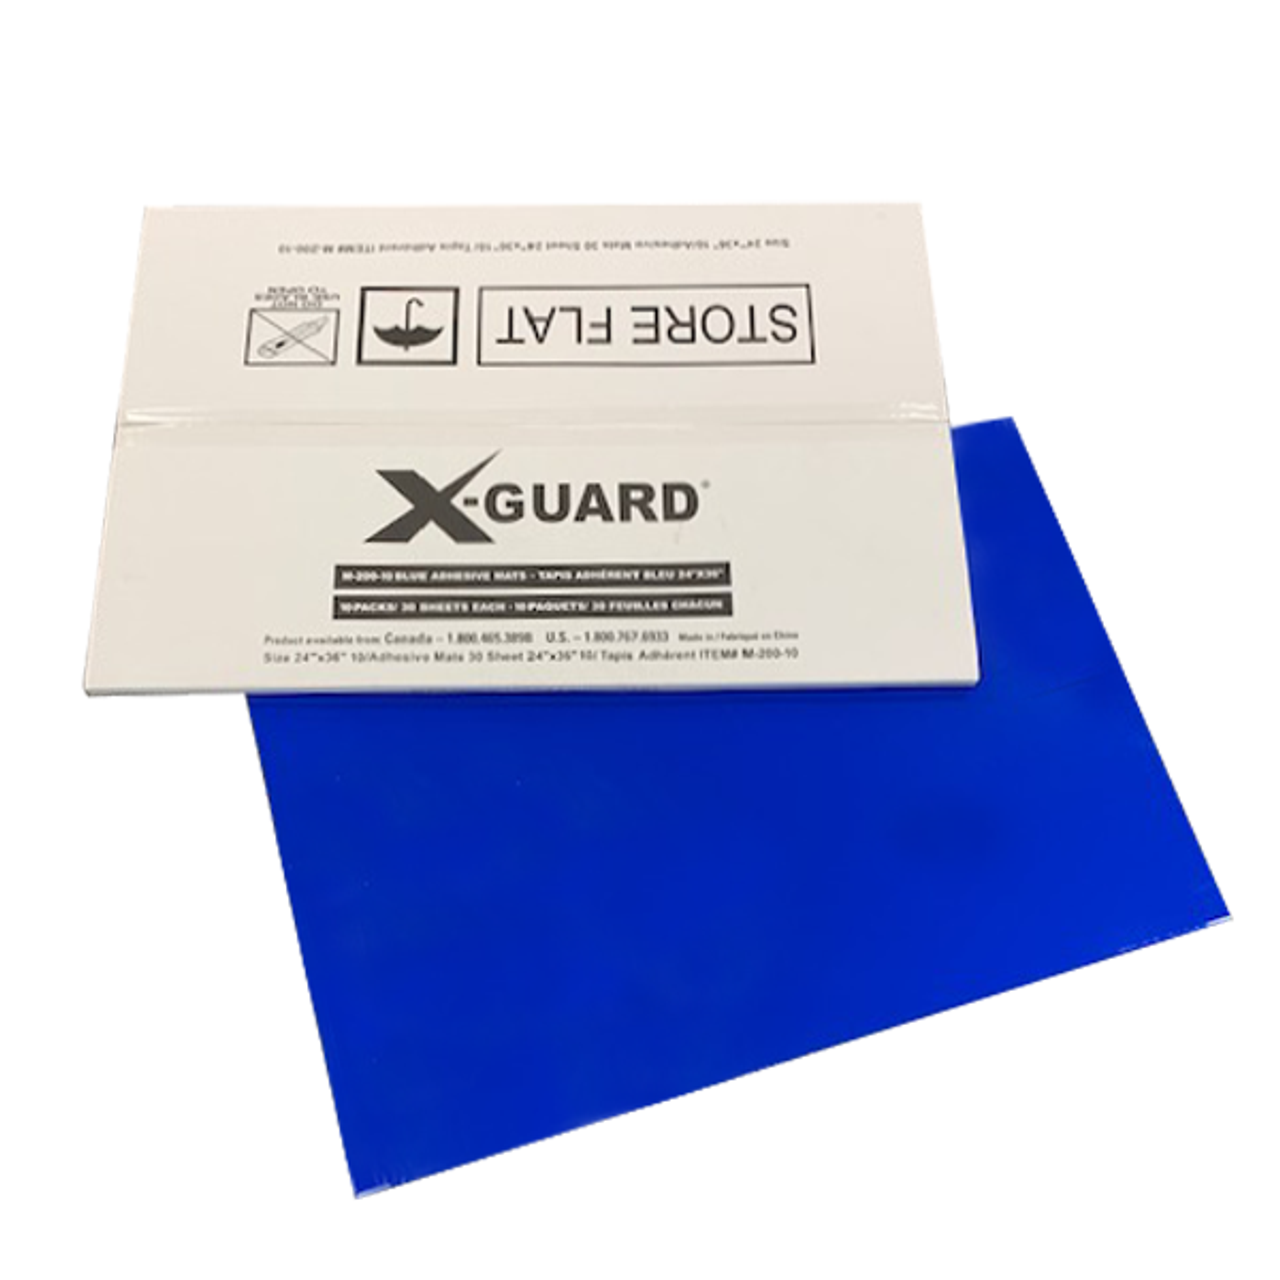 Poly-Tak Sticky Mat, Blue, 24in x 36in